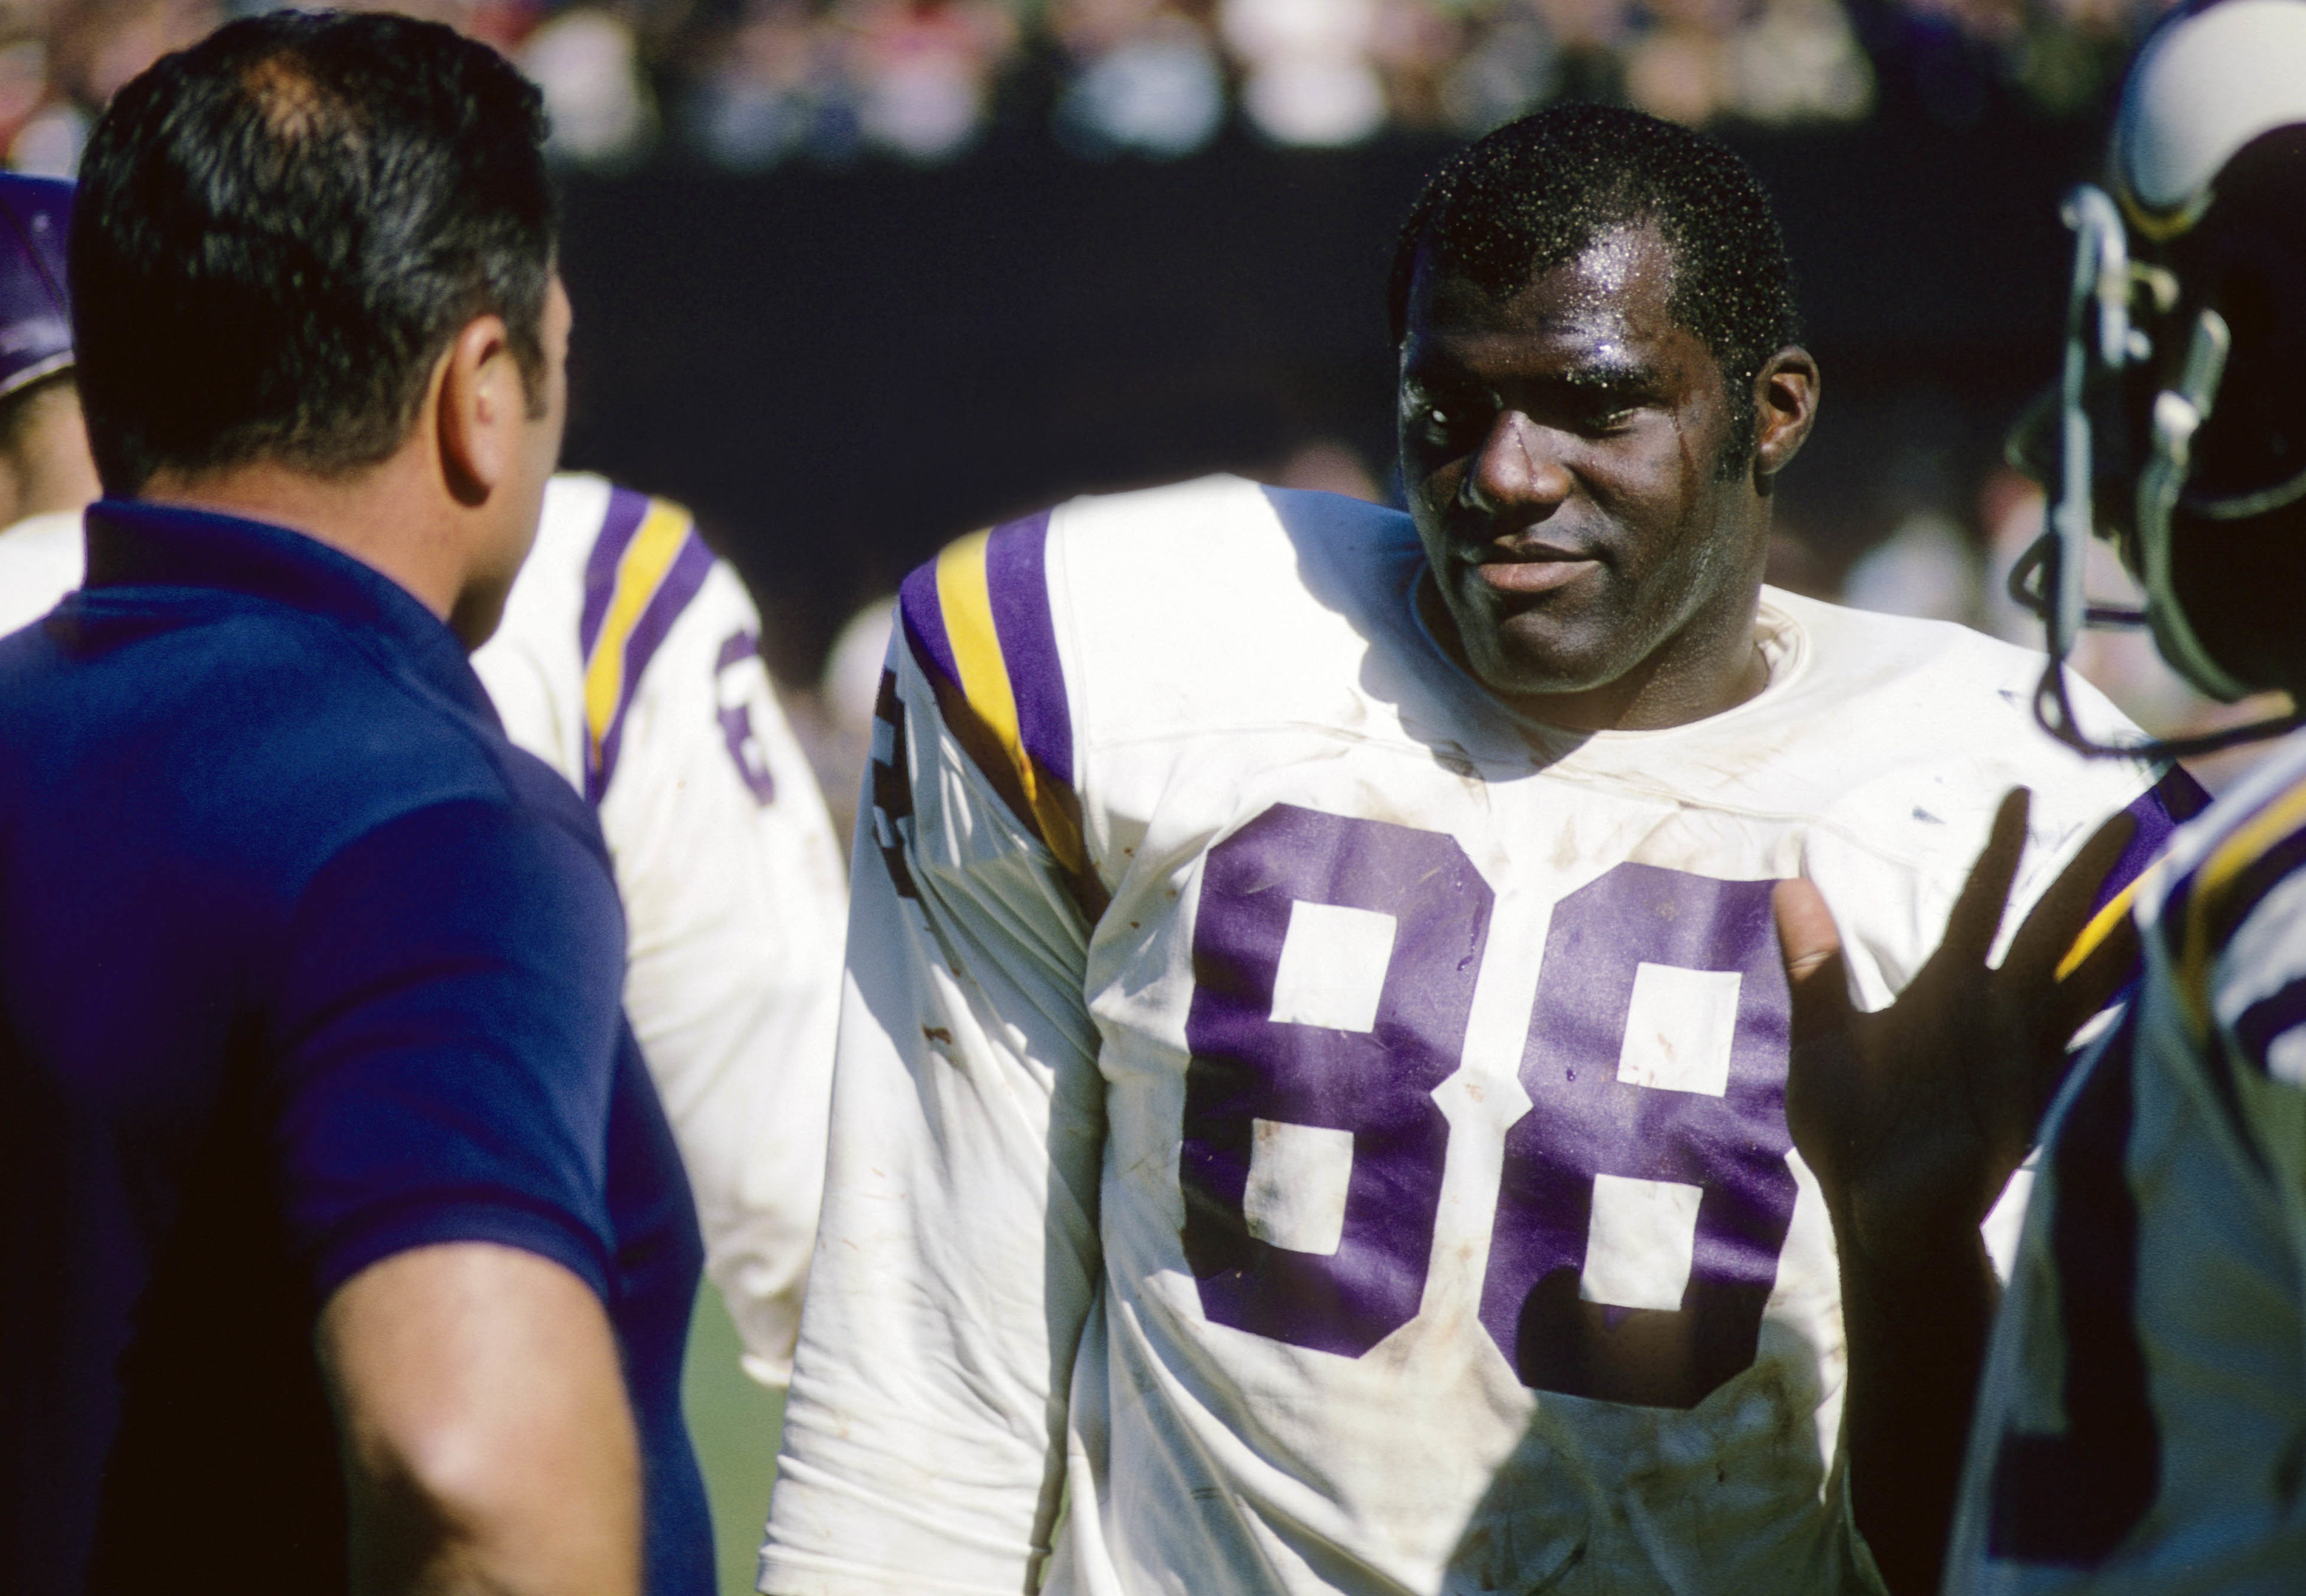 Alan Page a staple of Minneapolis after NFL, Justice careers